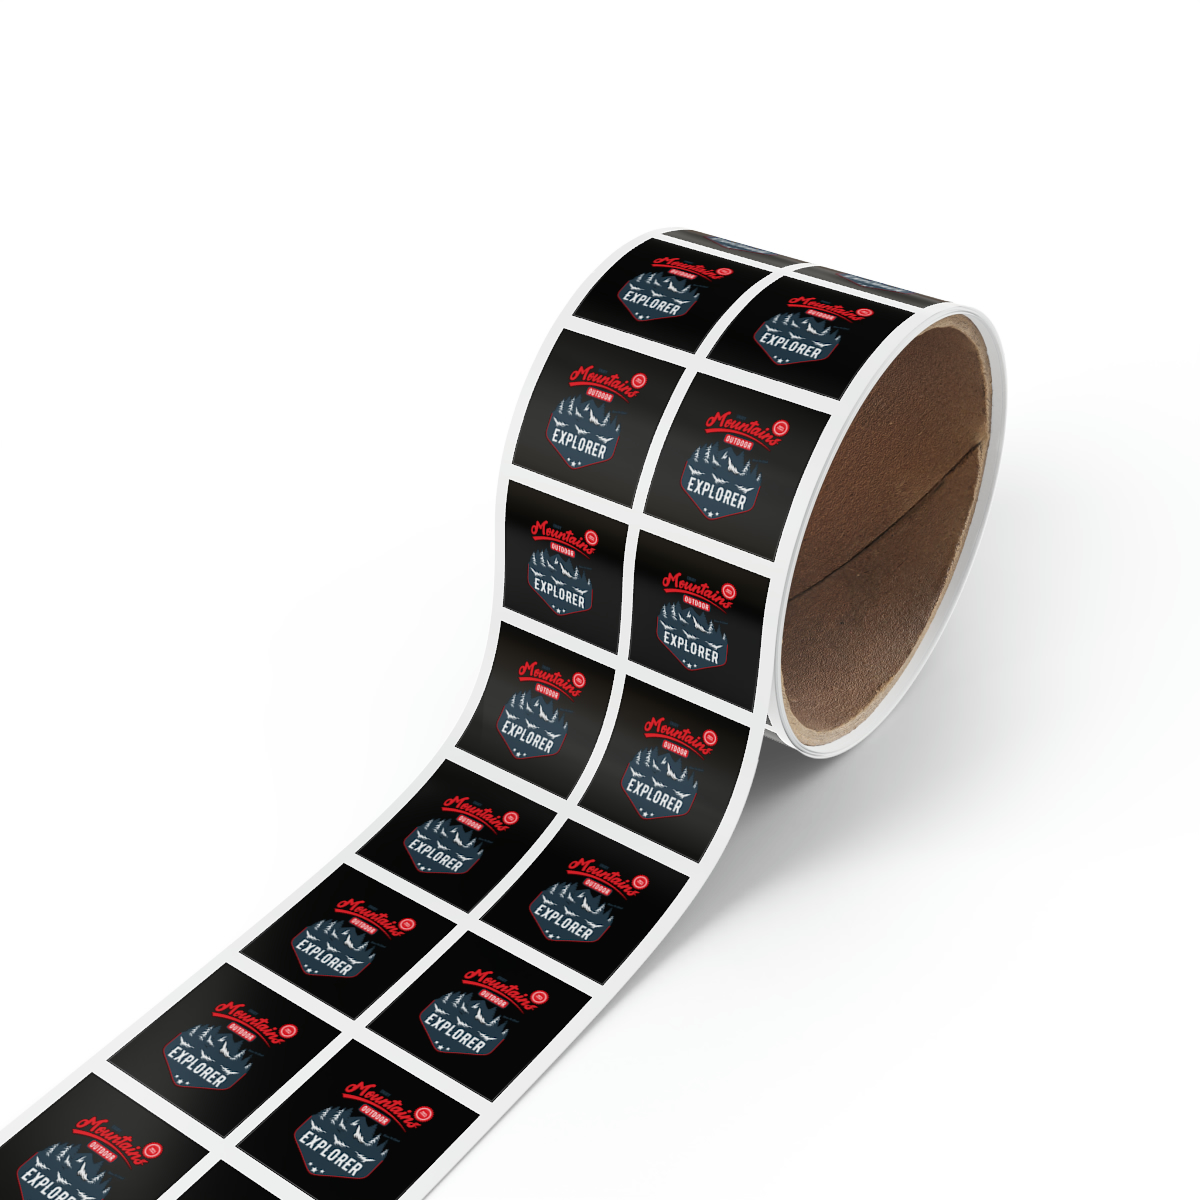 Glossy Square Label Stickers - 1"x1" & 2"x2" | 50-250pc Roll | Durable BOPP Mate - $85.49 - $153.47